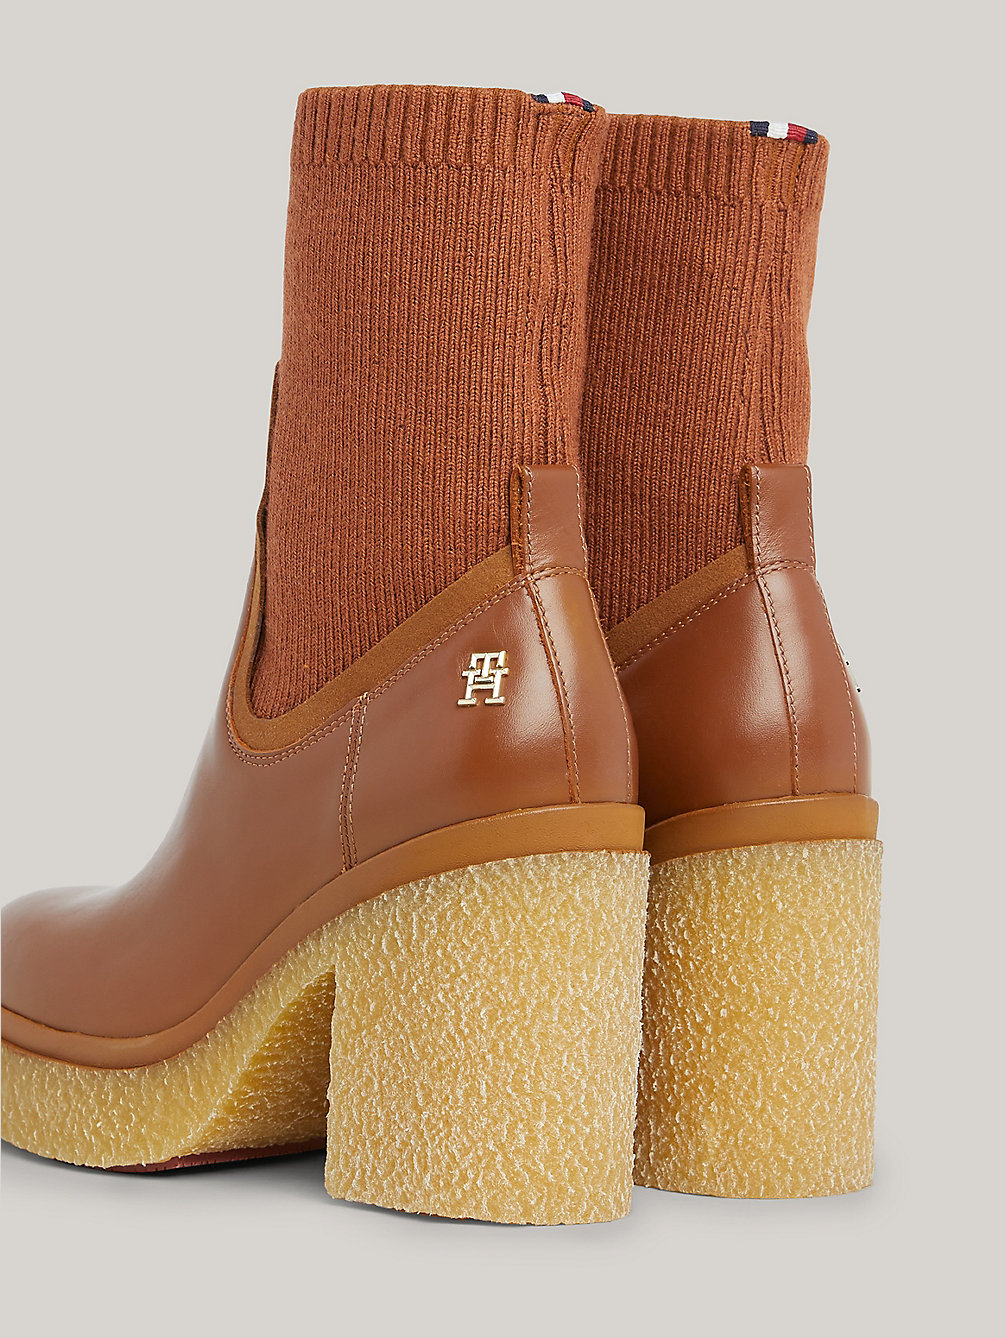 brown leather crepe sole heeled sock boots for women tommy hilfiger